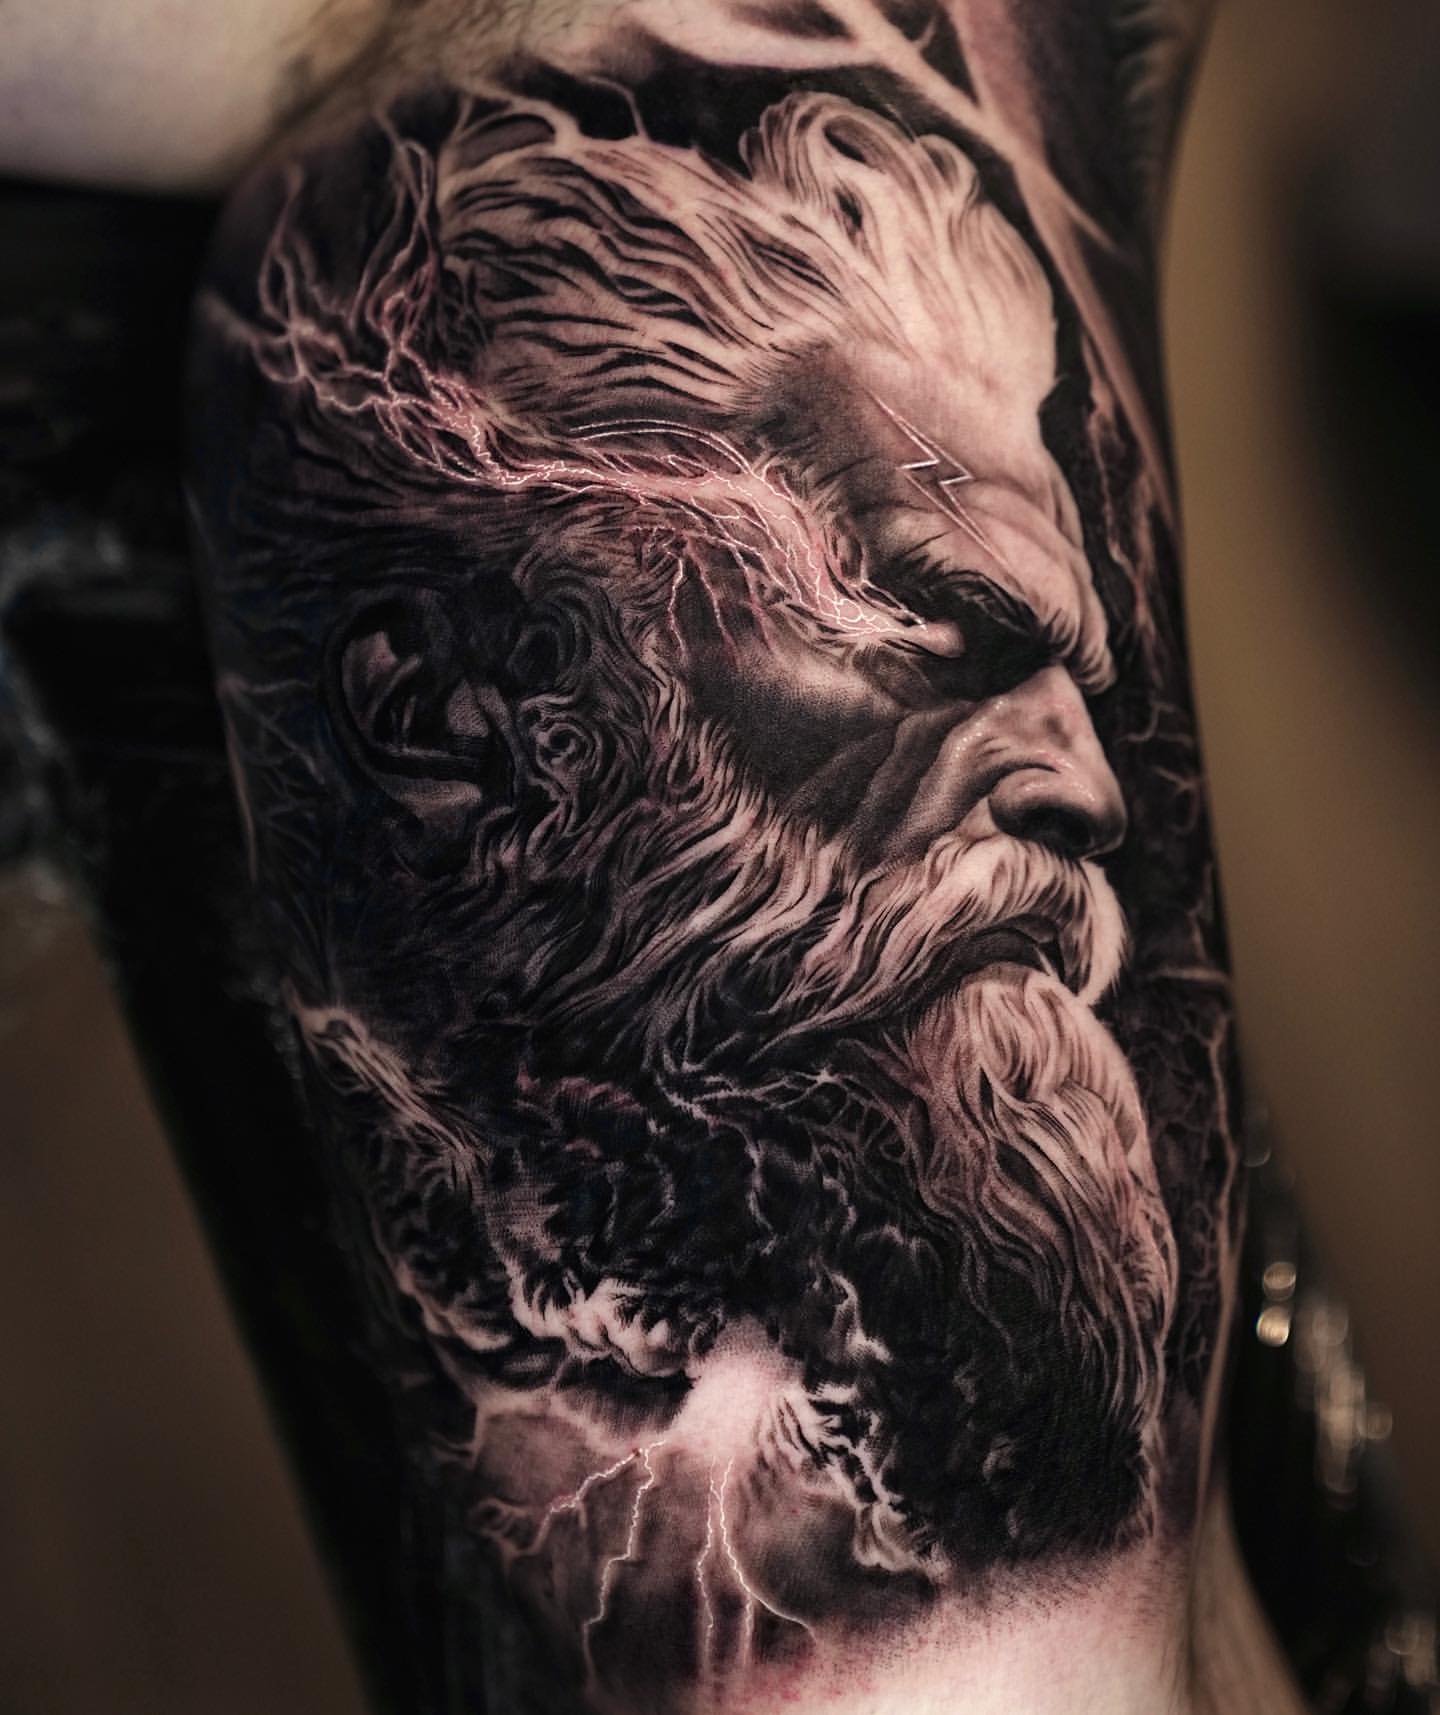 Today I got to finish tattooing this Zeus portrait that I started 2yrs ago.  Most of it is healed so I just had to finish off the top left hand corner.  I... |